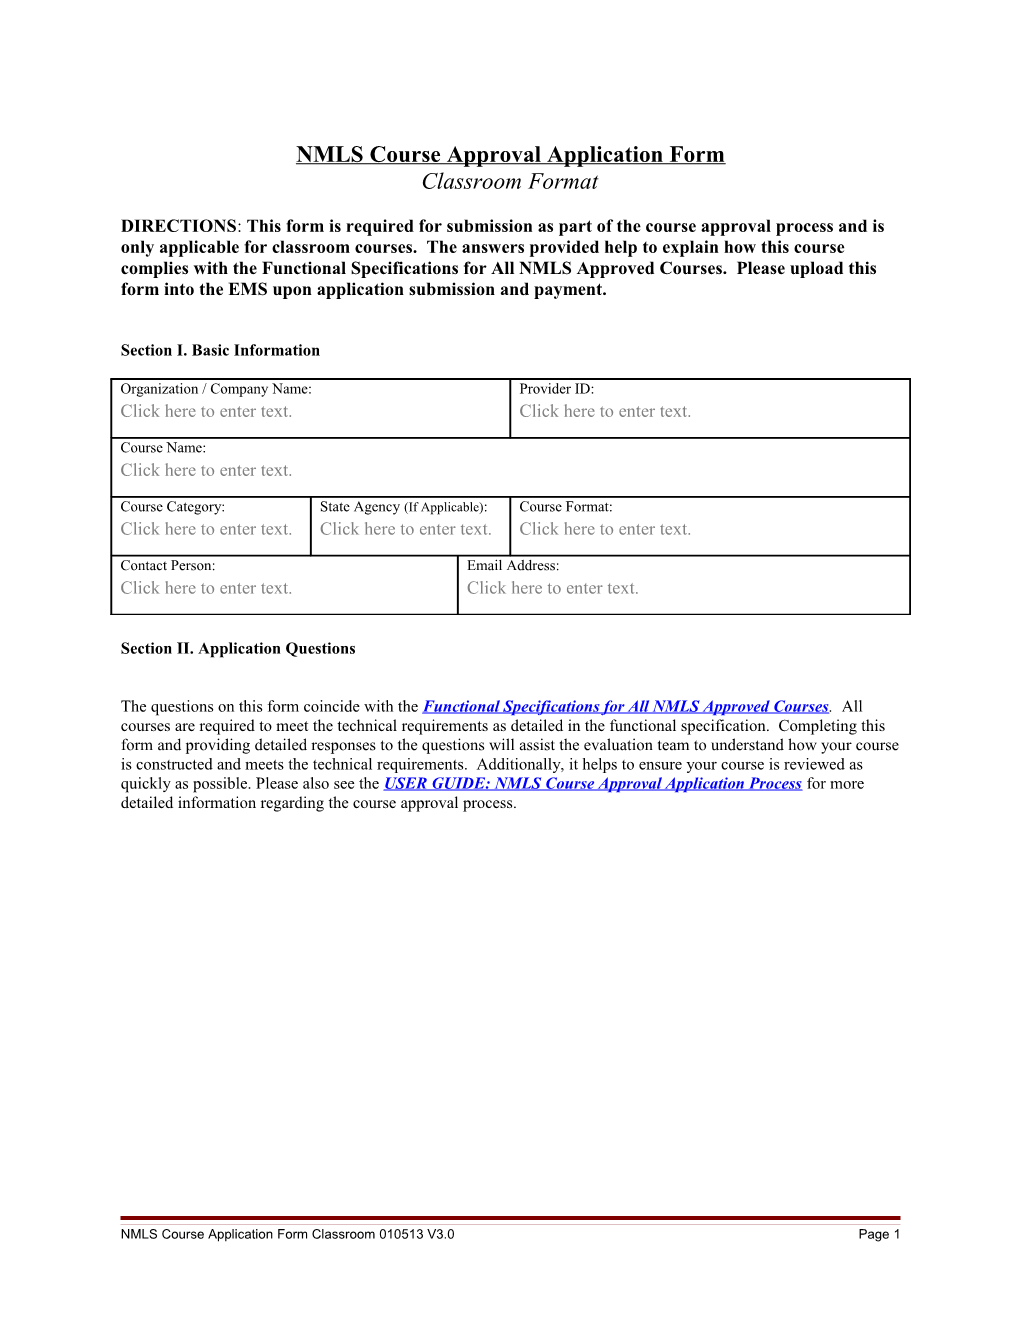 Classroom NMLS Course Application Form